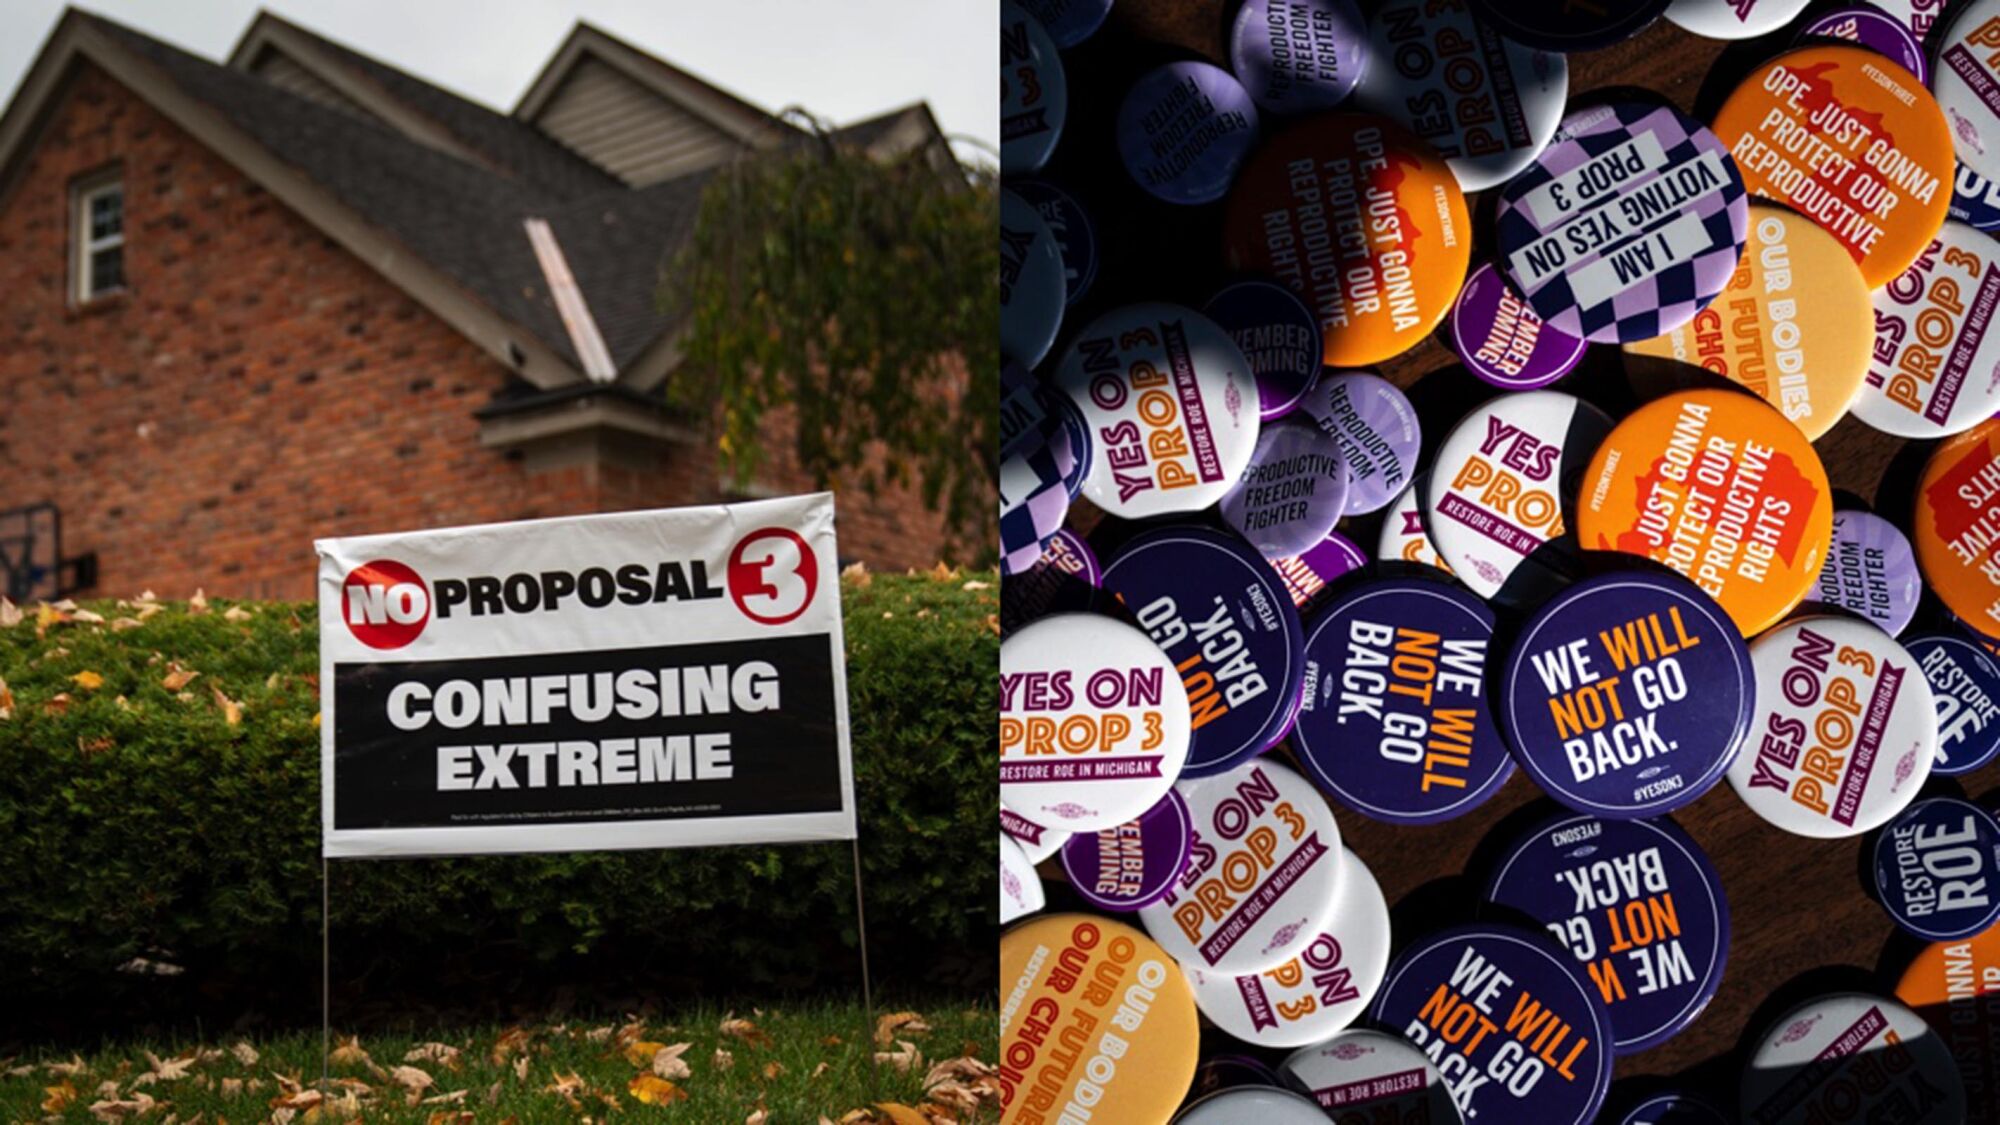 Side by side photos of a sign against Michigan Proposal 3, and campaign buttons for Michigan Proposal 3.